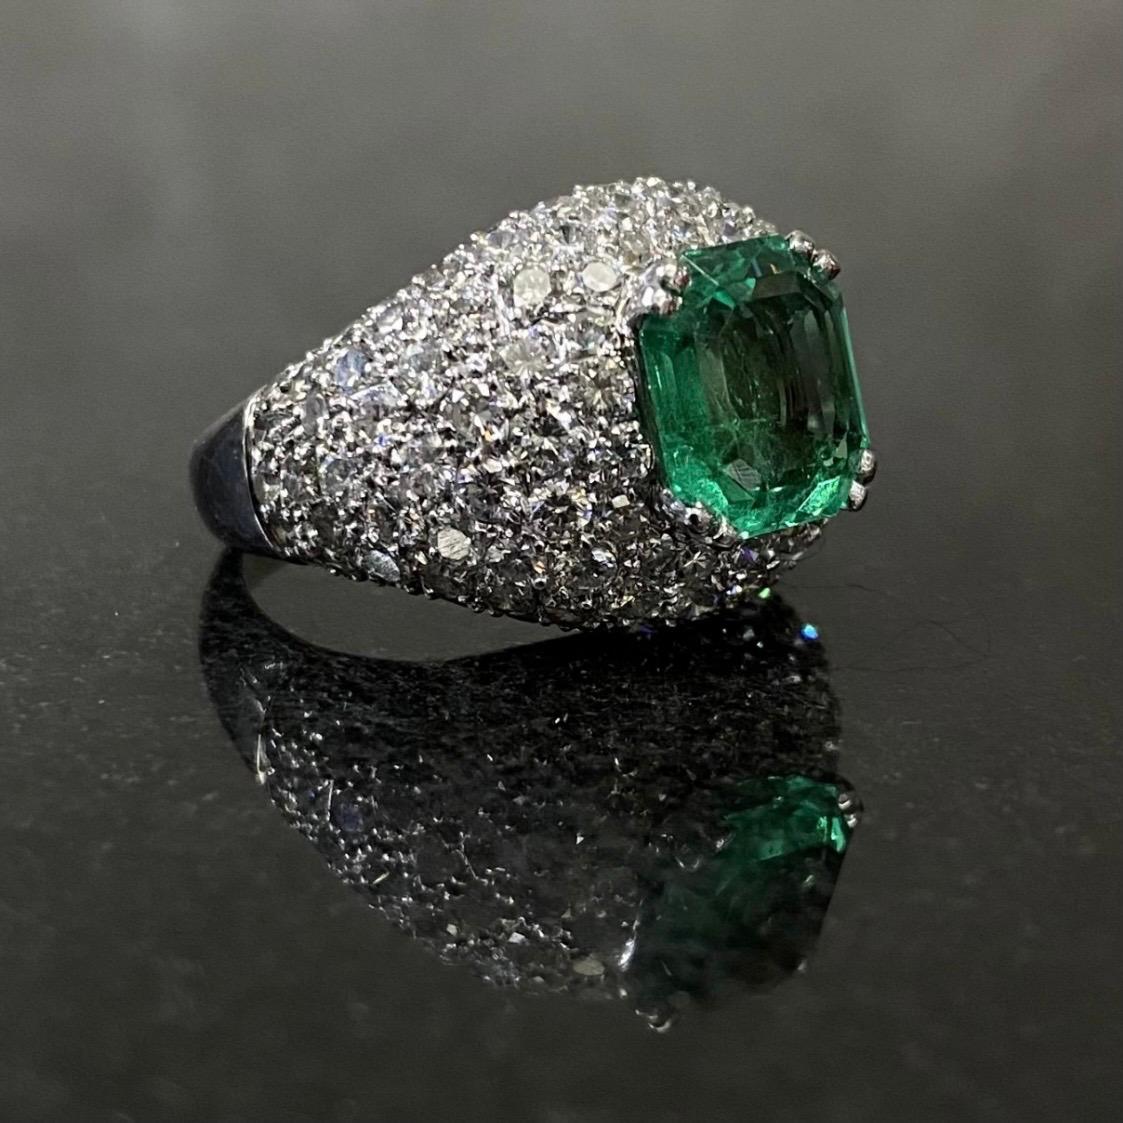 Vintage 1960s/1970s Colombian Emerald Diamond Bombe Cocktail Ring Platinum 9